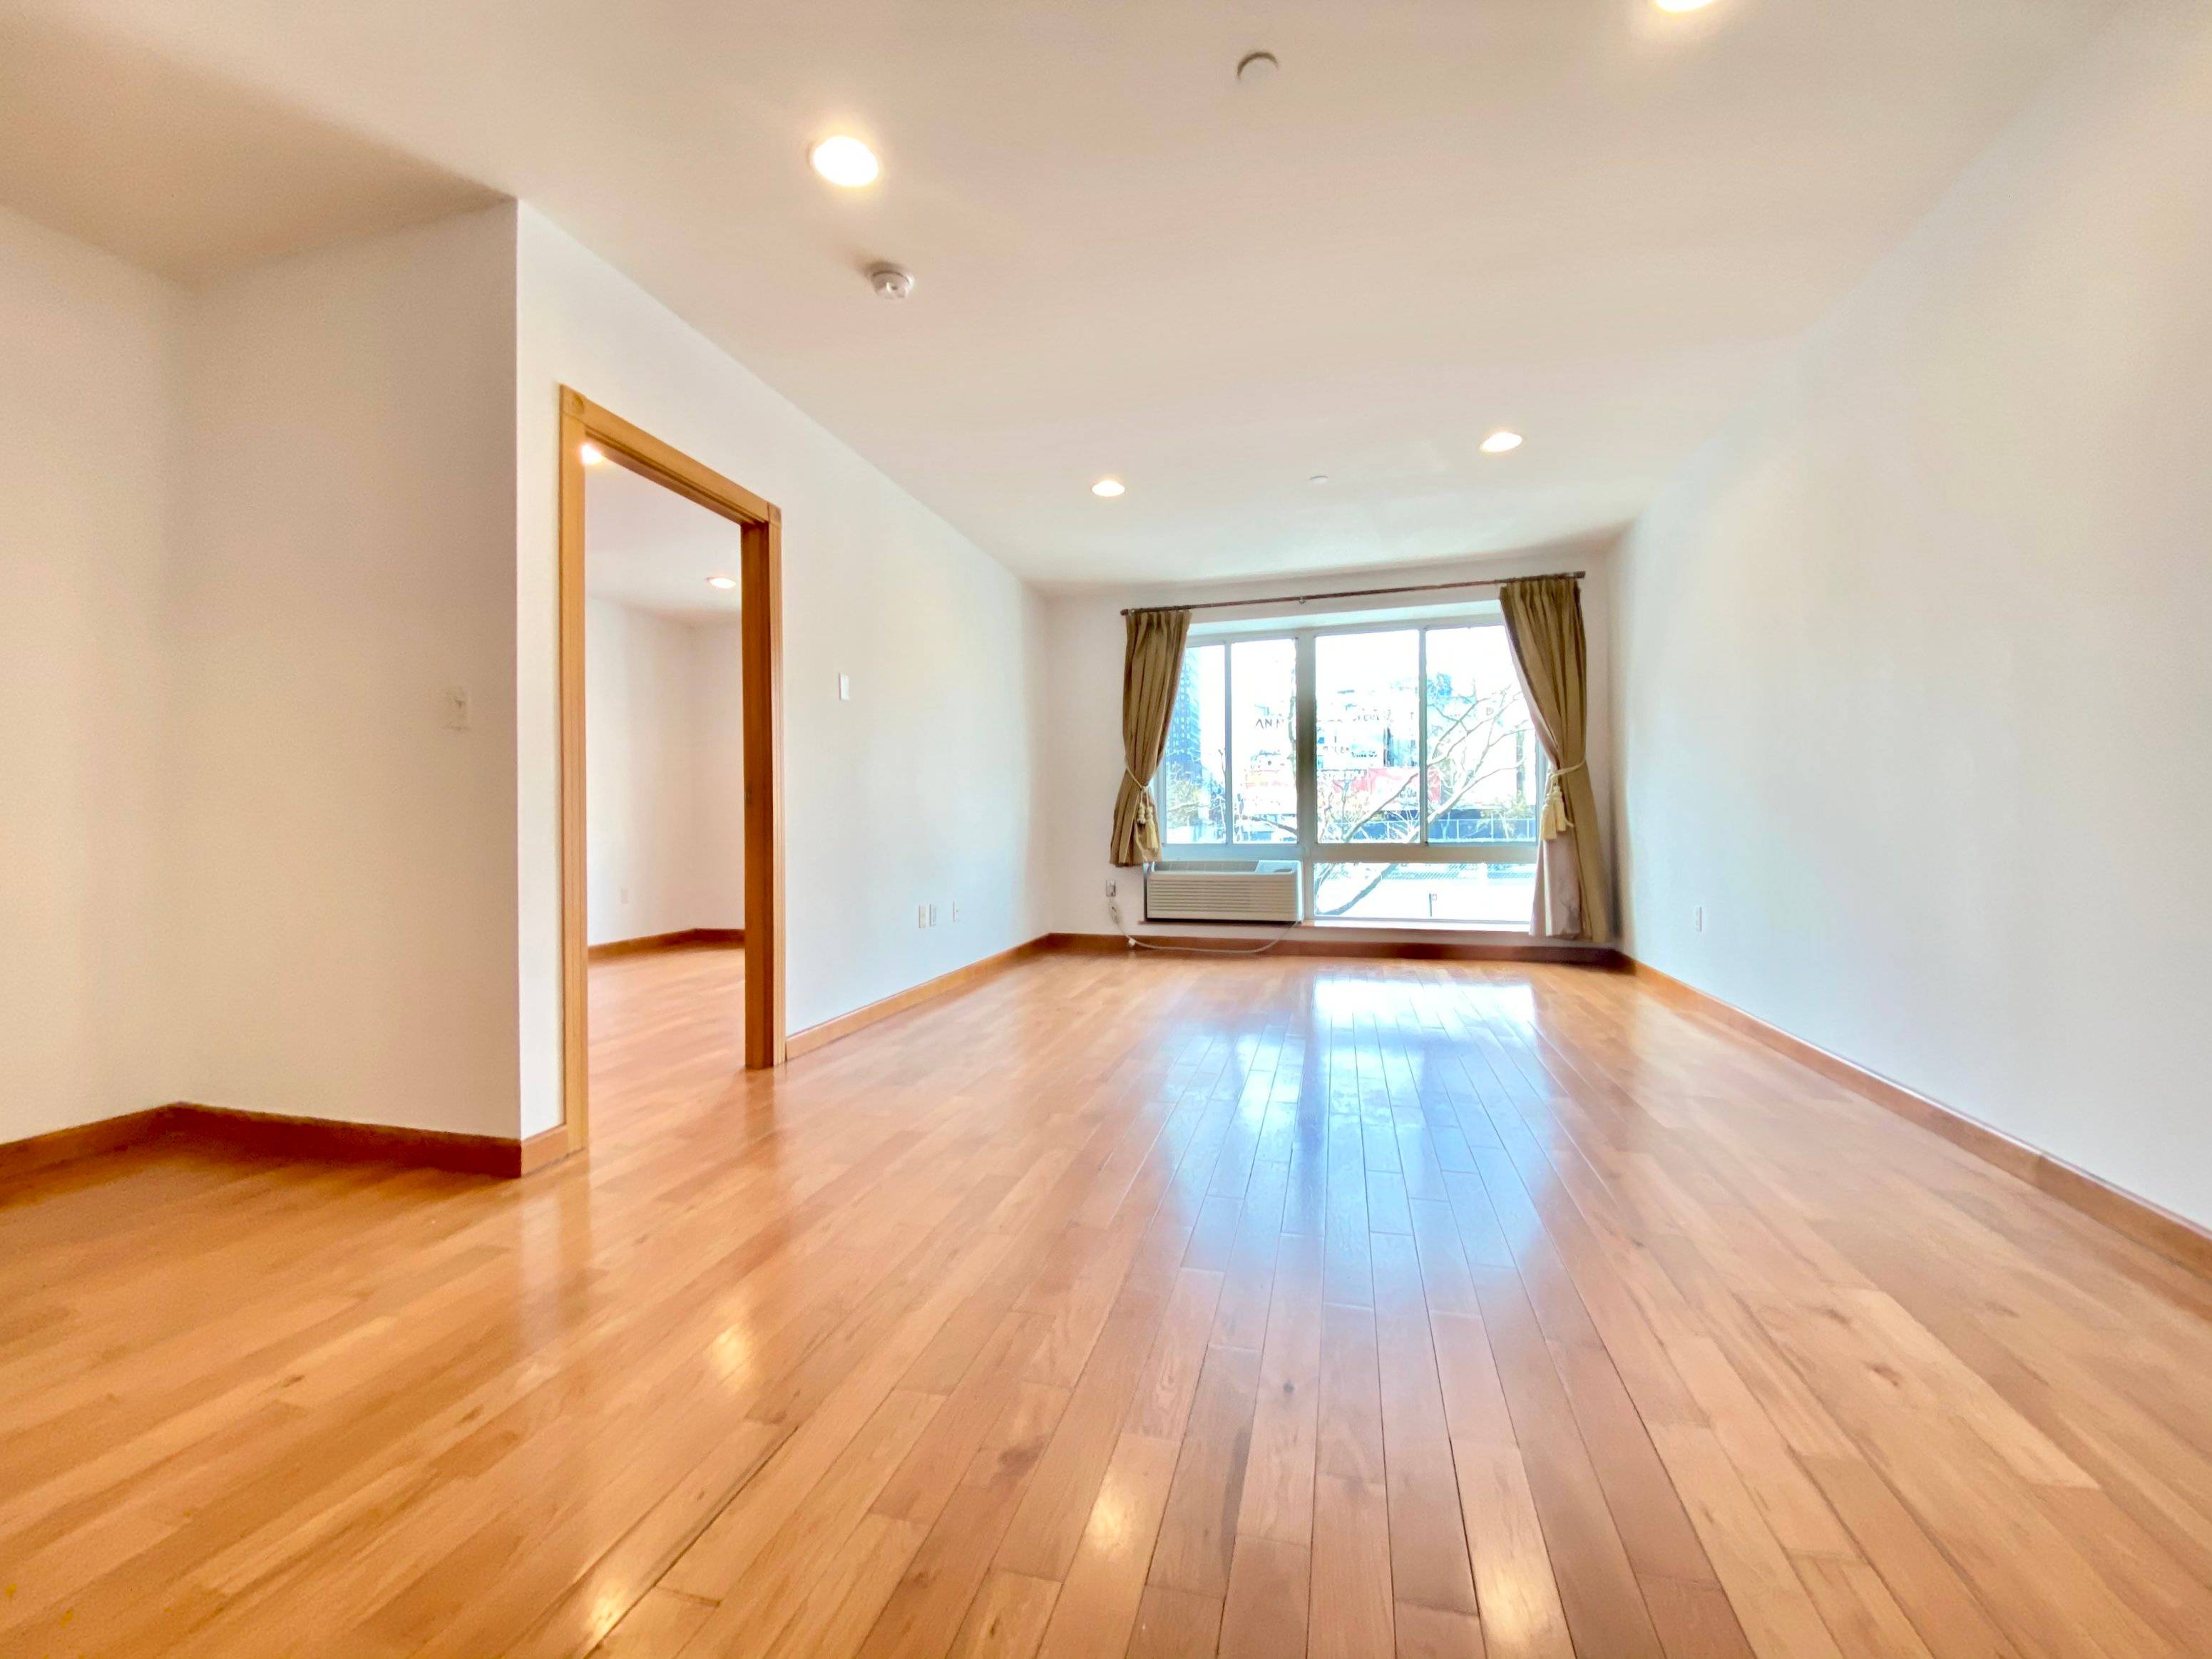 Welcome home ! Residence 2H Enjoy extensive bright living room over looking at the iconic treelined block of Delancey St Williamsburg Bridge through floor to ceiling windows, it goes on ...